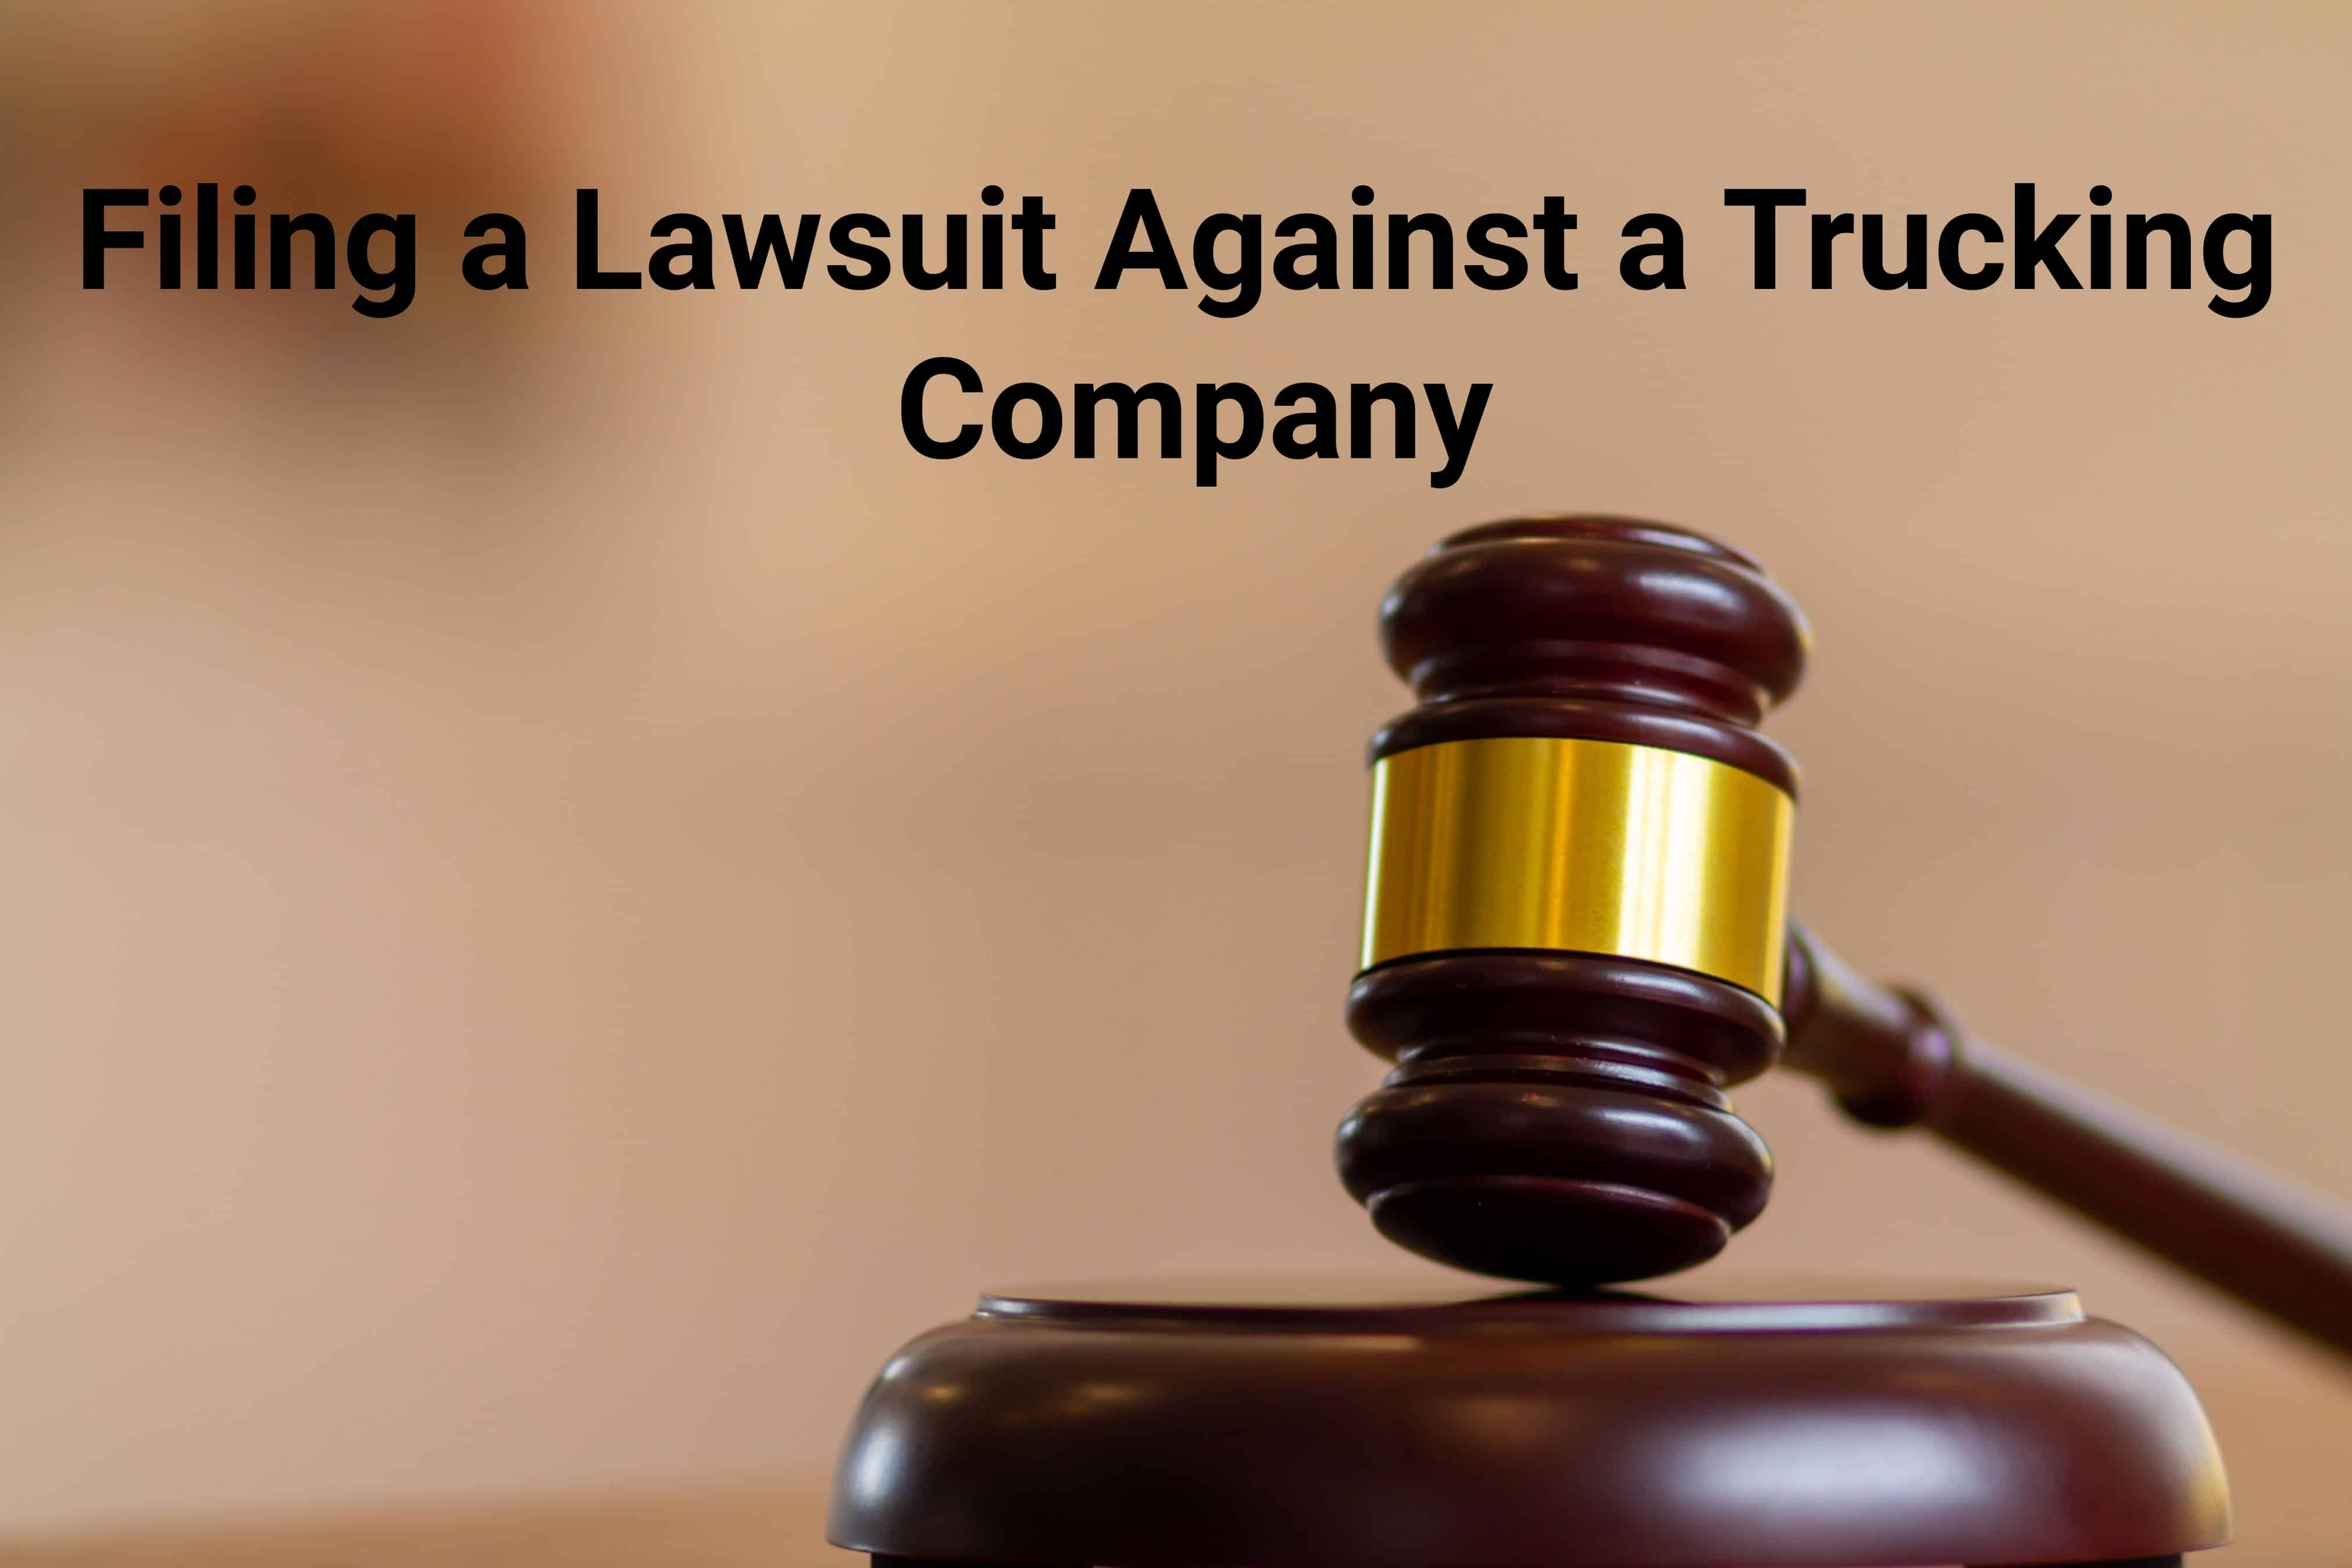 Filing a lawsuit against a trucking company